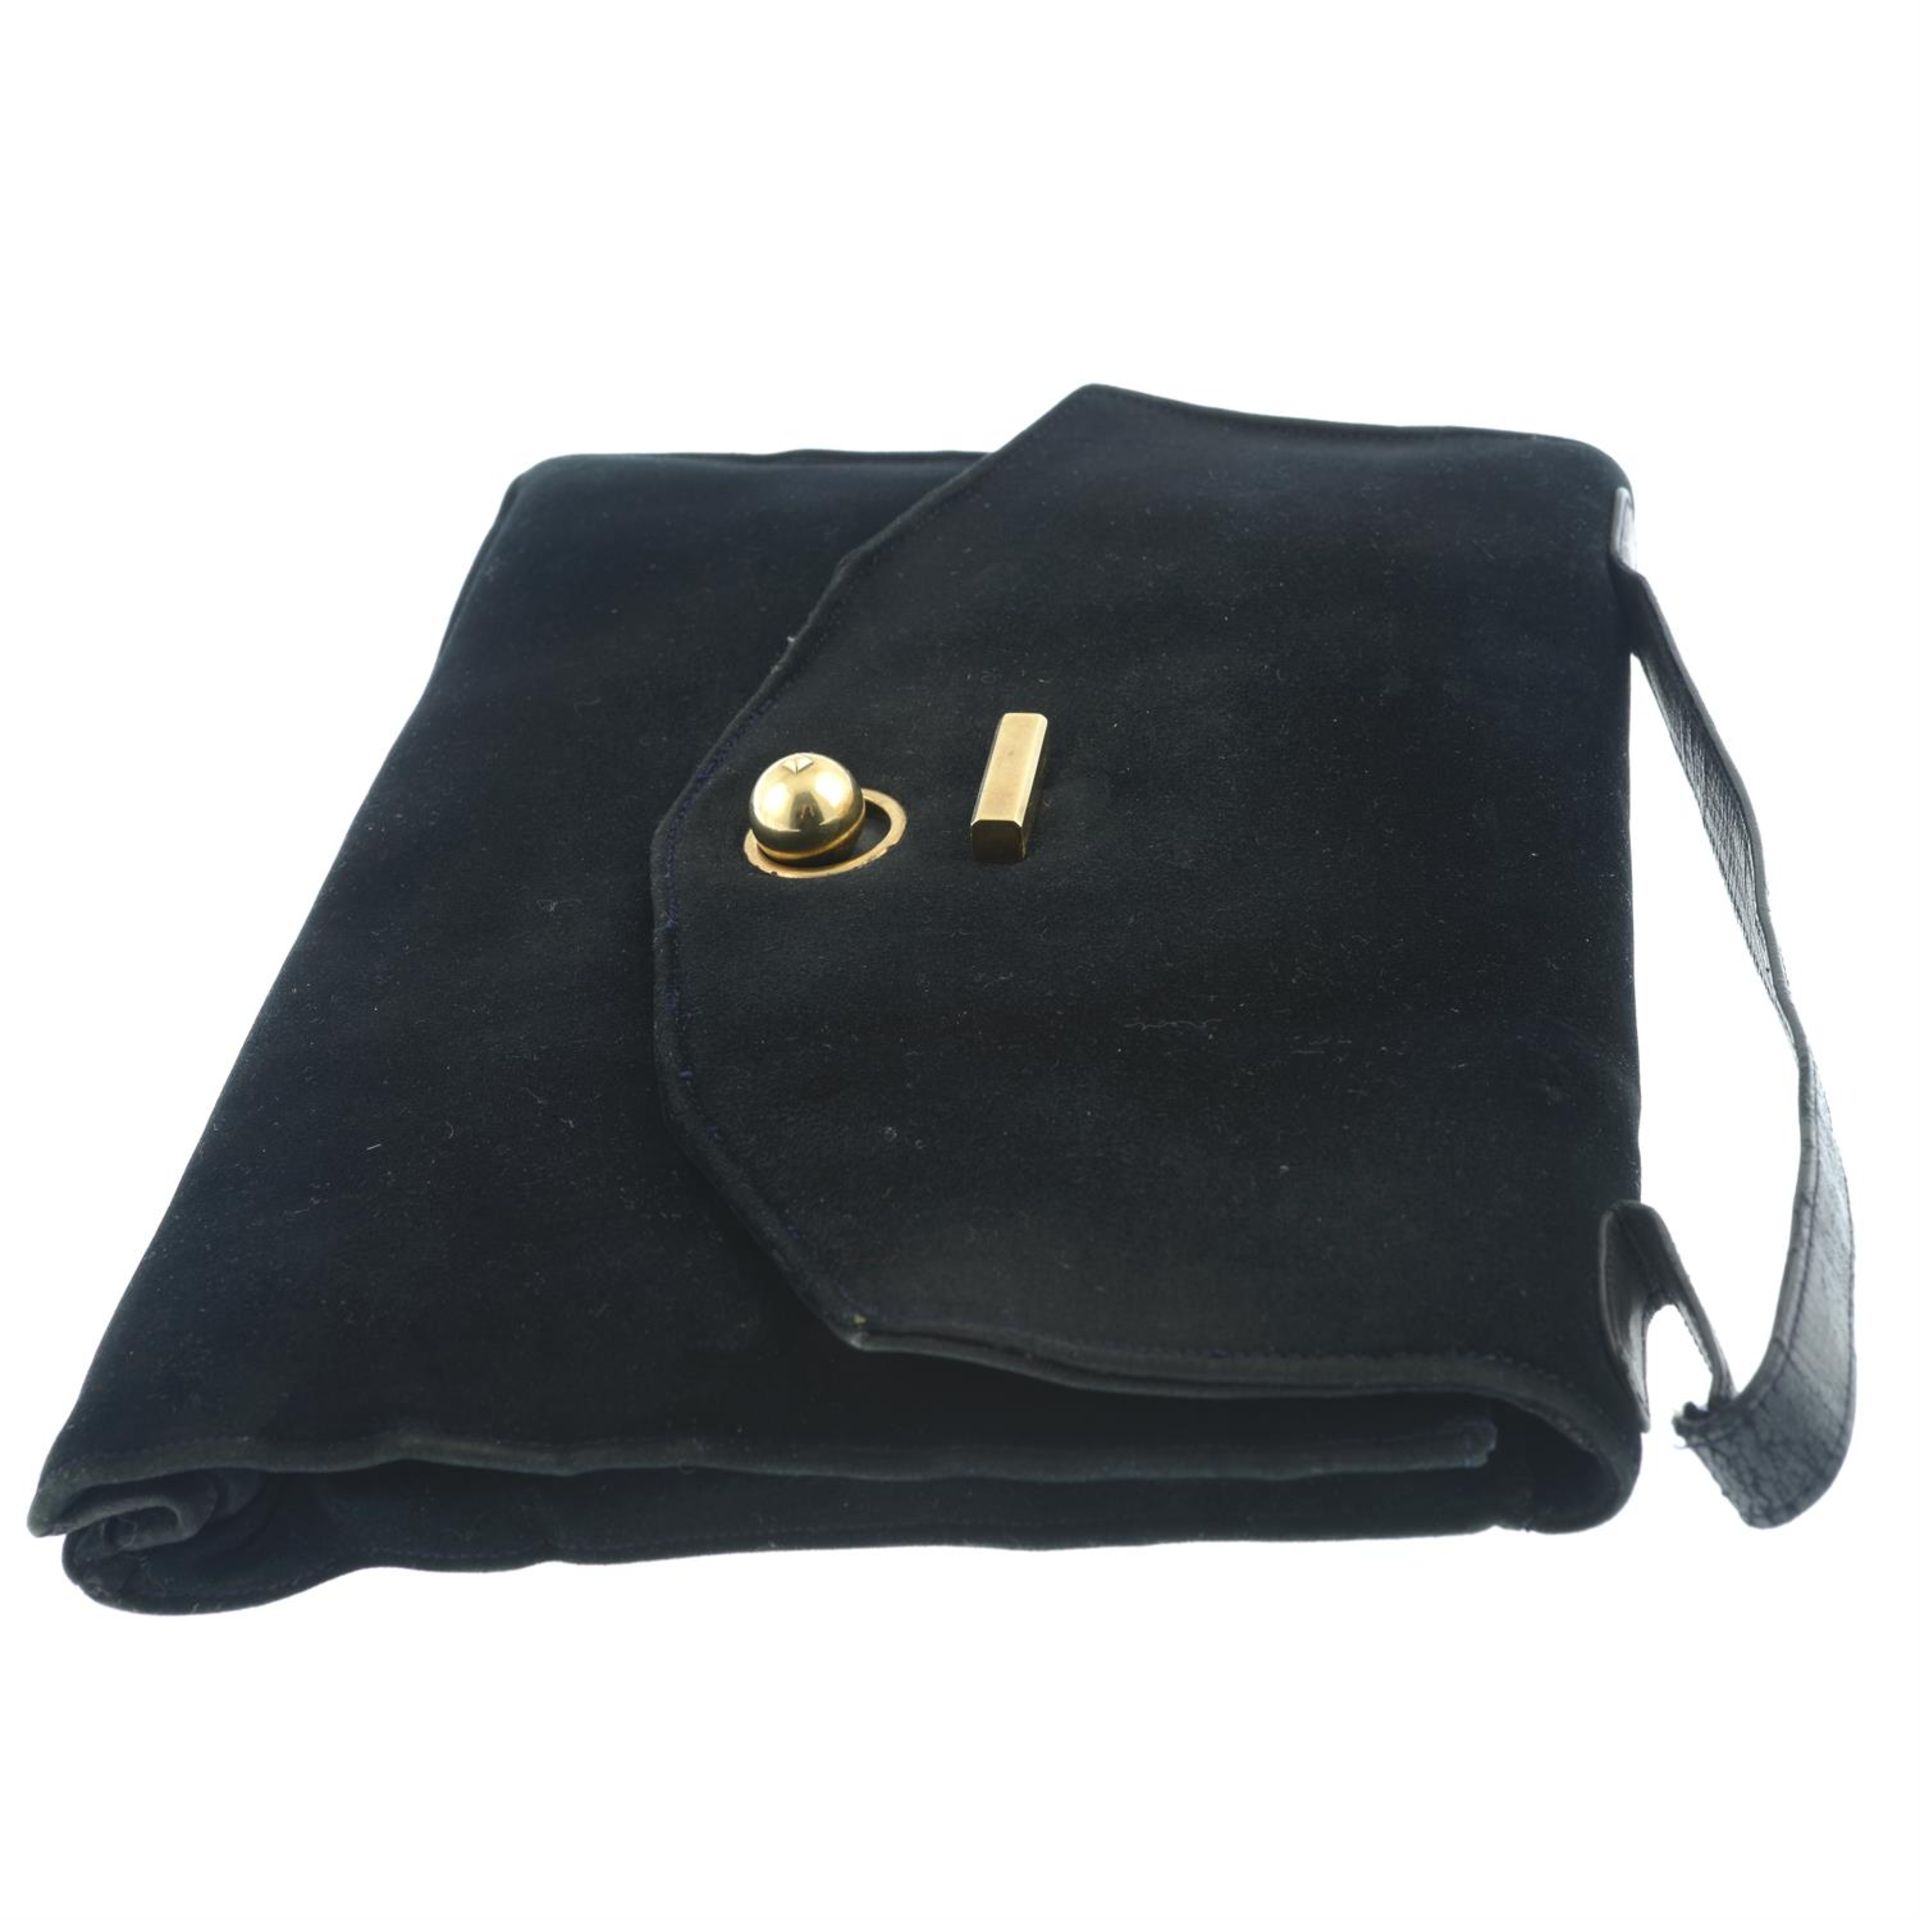 CARTIER - a 1930s black suede leather handbag with 9ct gold hardware. - Image 3 of 8